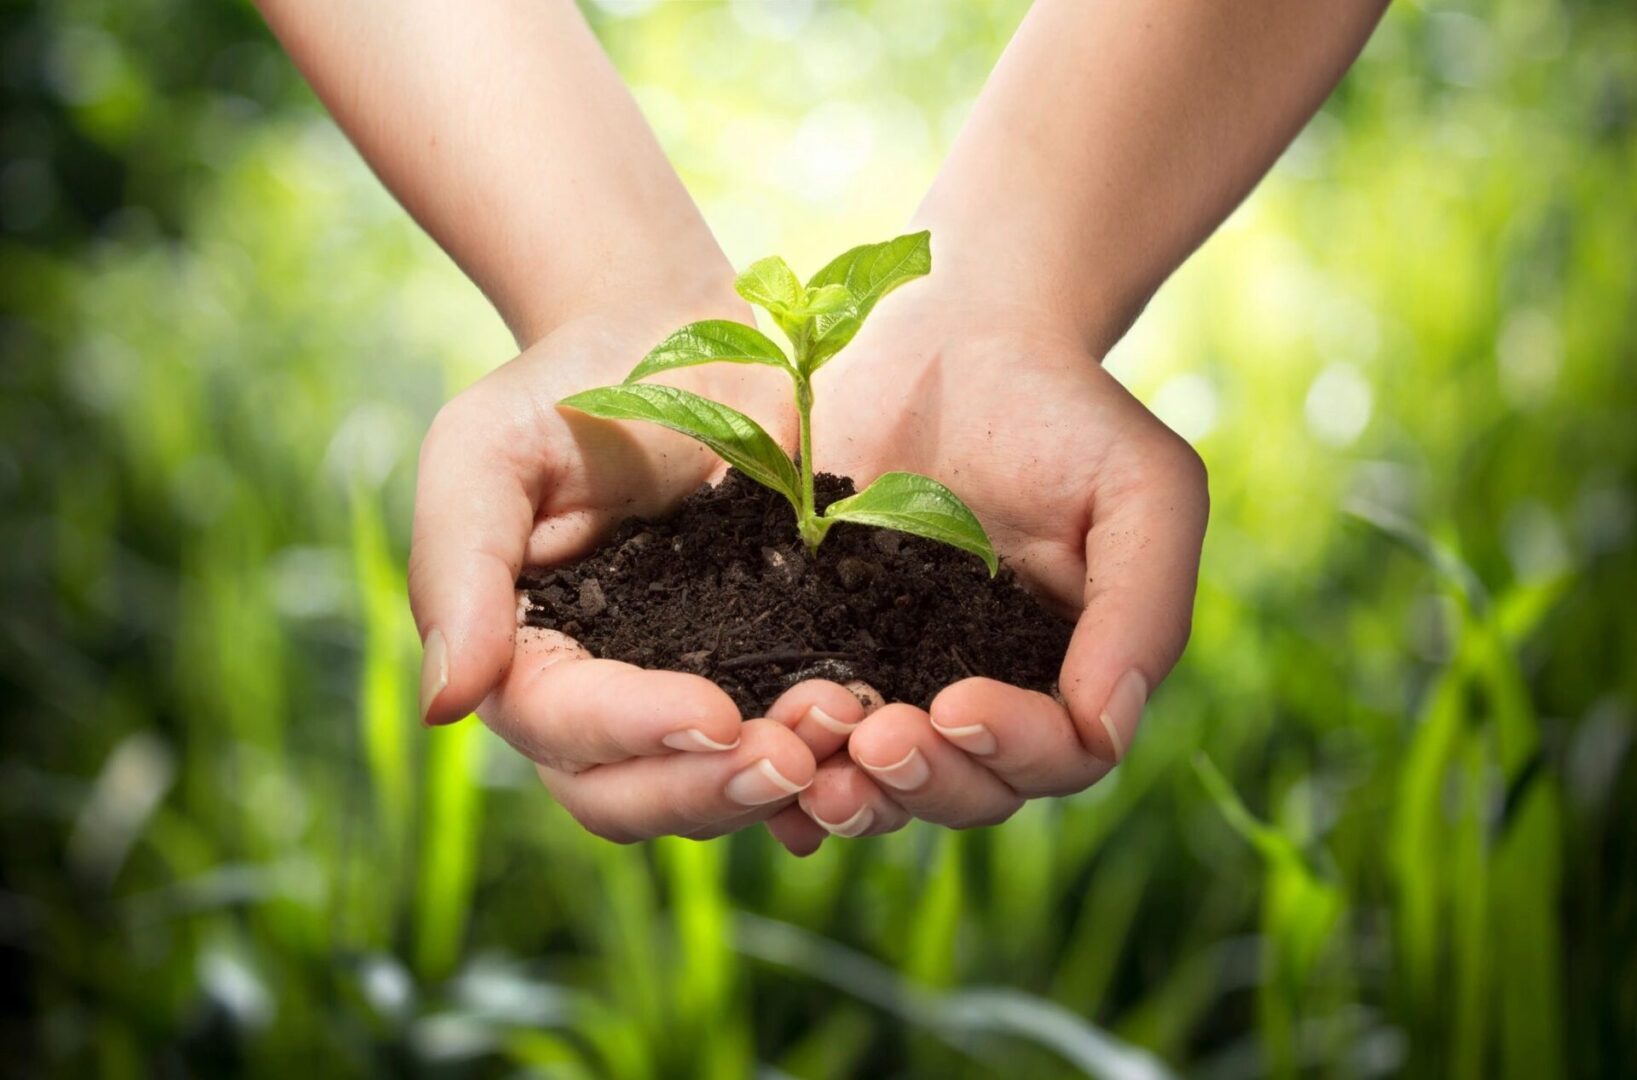 A person holding dirt and a plant in their hands.